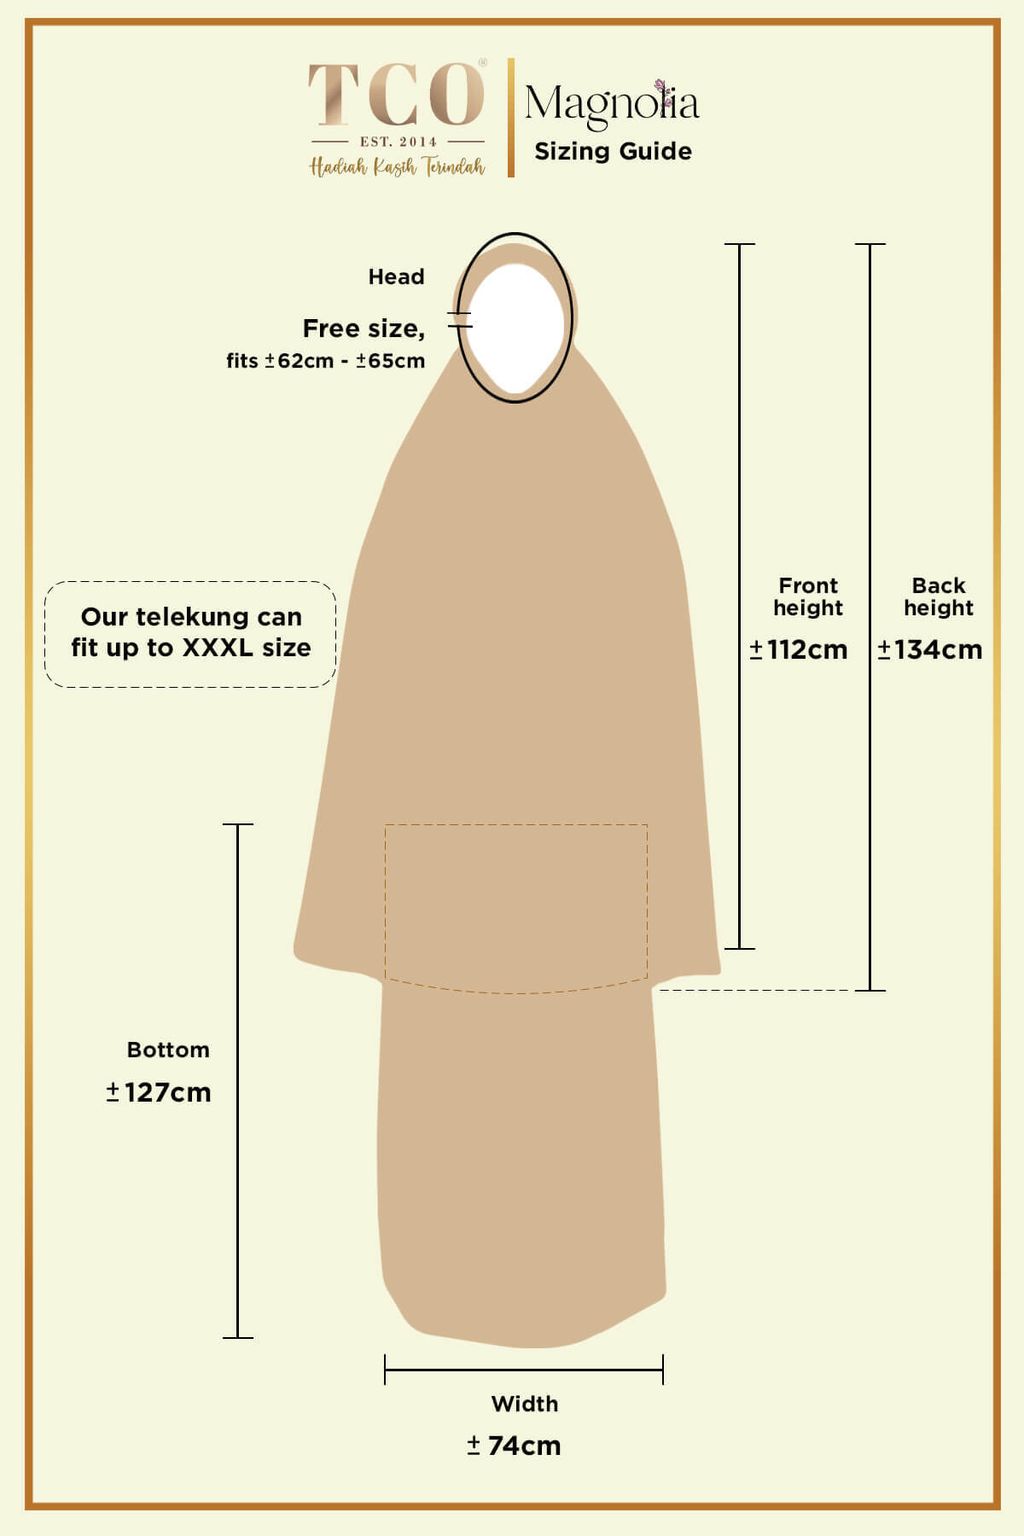 Telekung Magnolia by TCO - Sizing guide